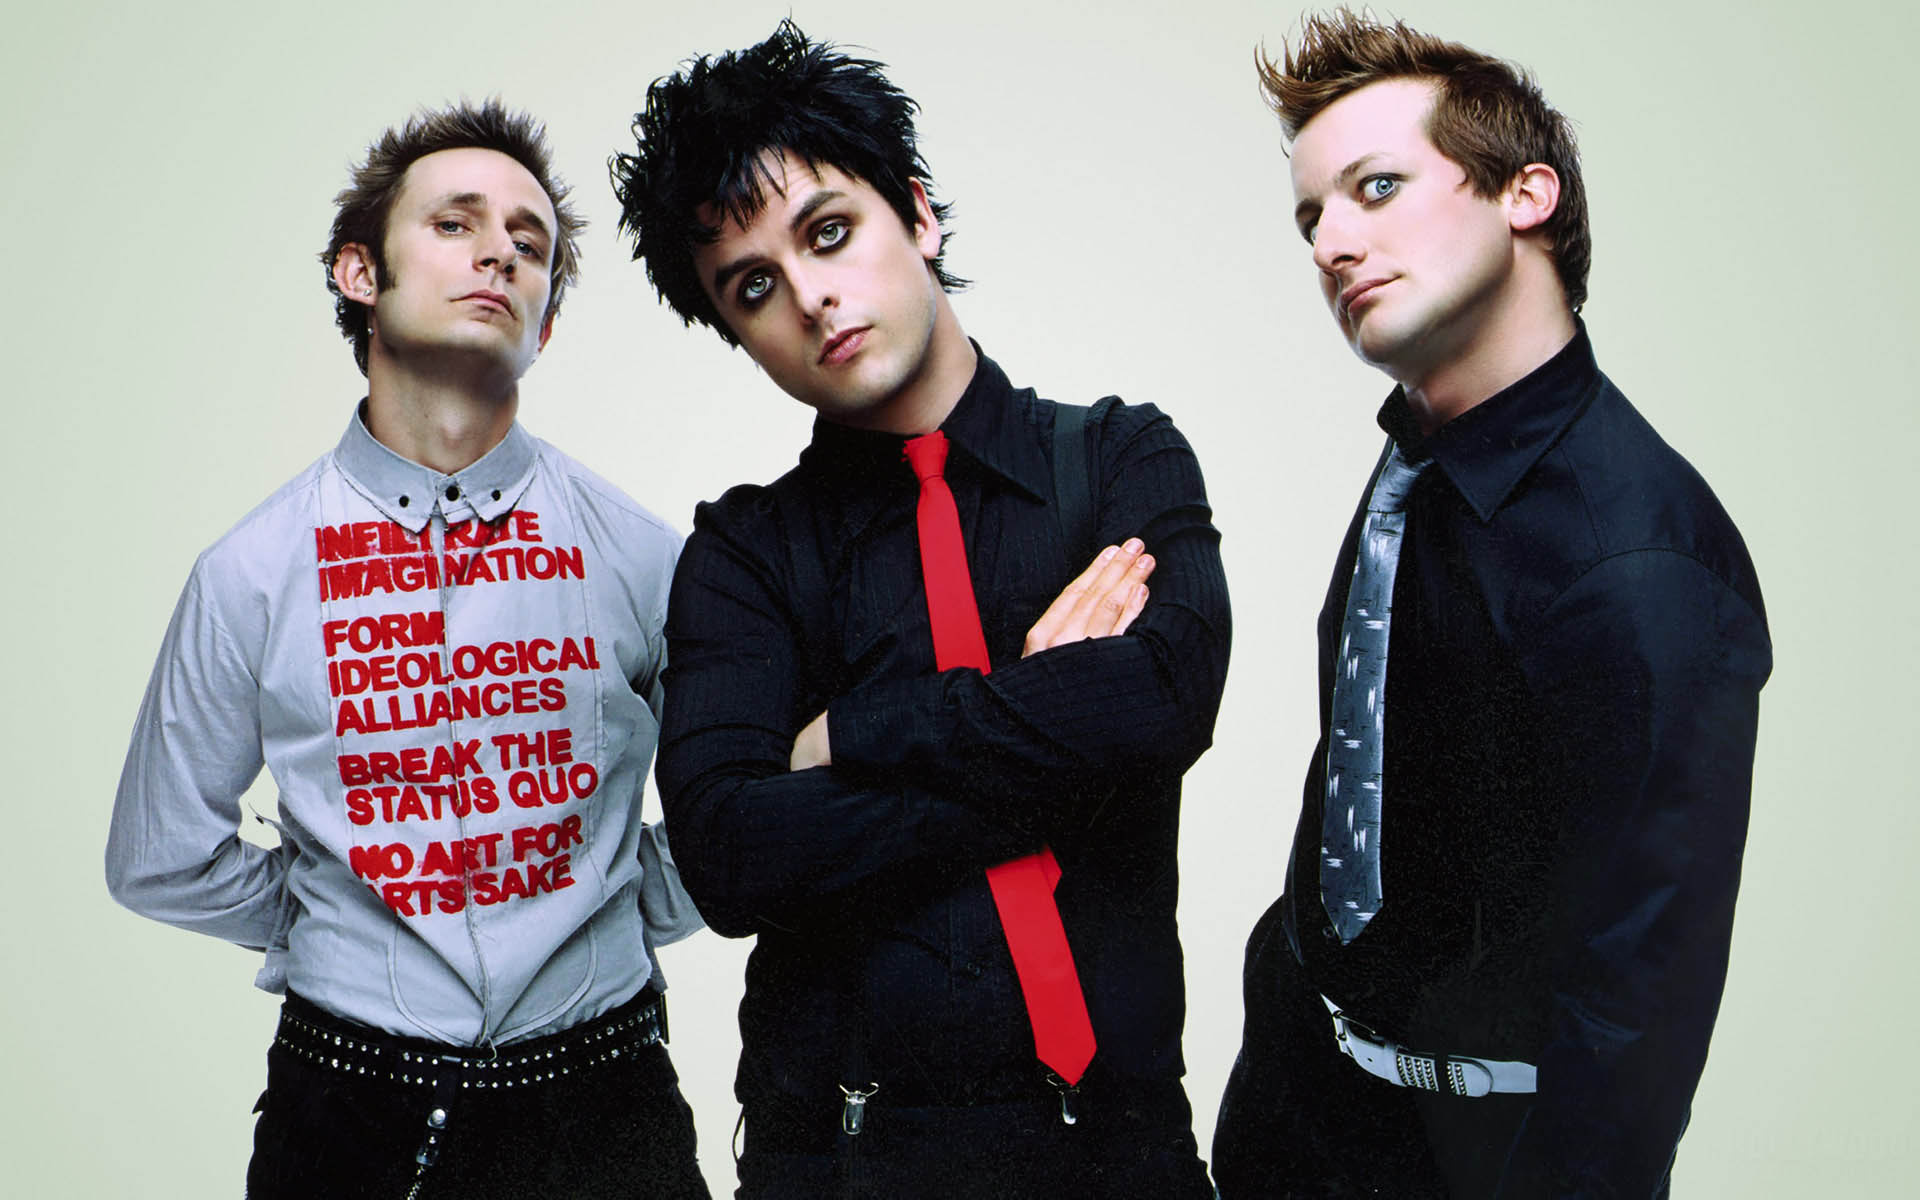 Green Day (Band): Green Day Theme for Windows 10 | 8 | 7. 1920x1200 HD Wallpaper.